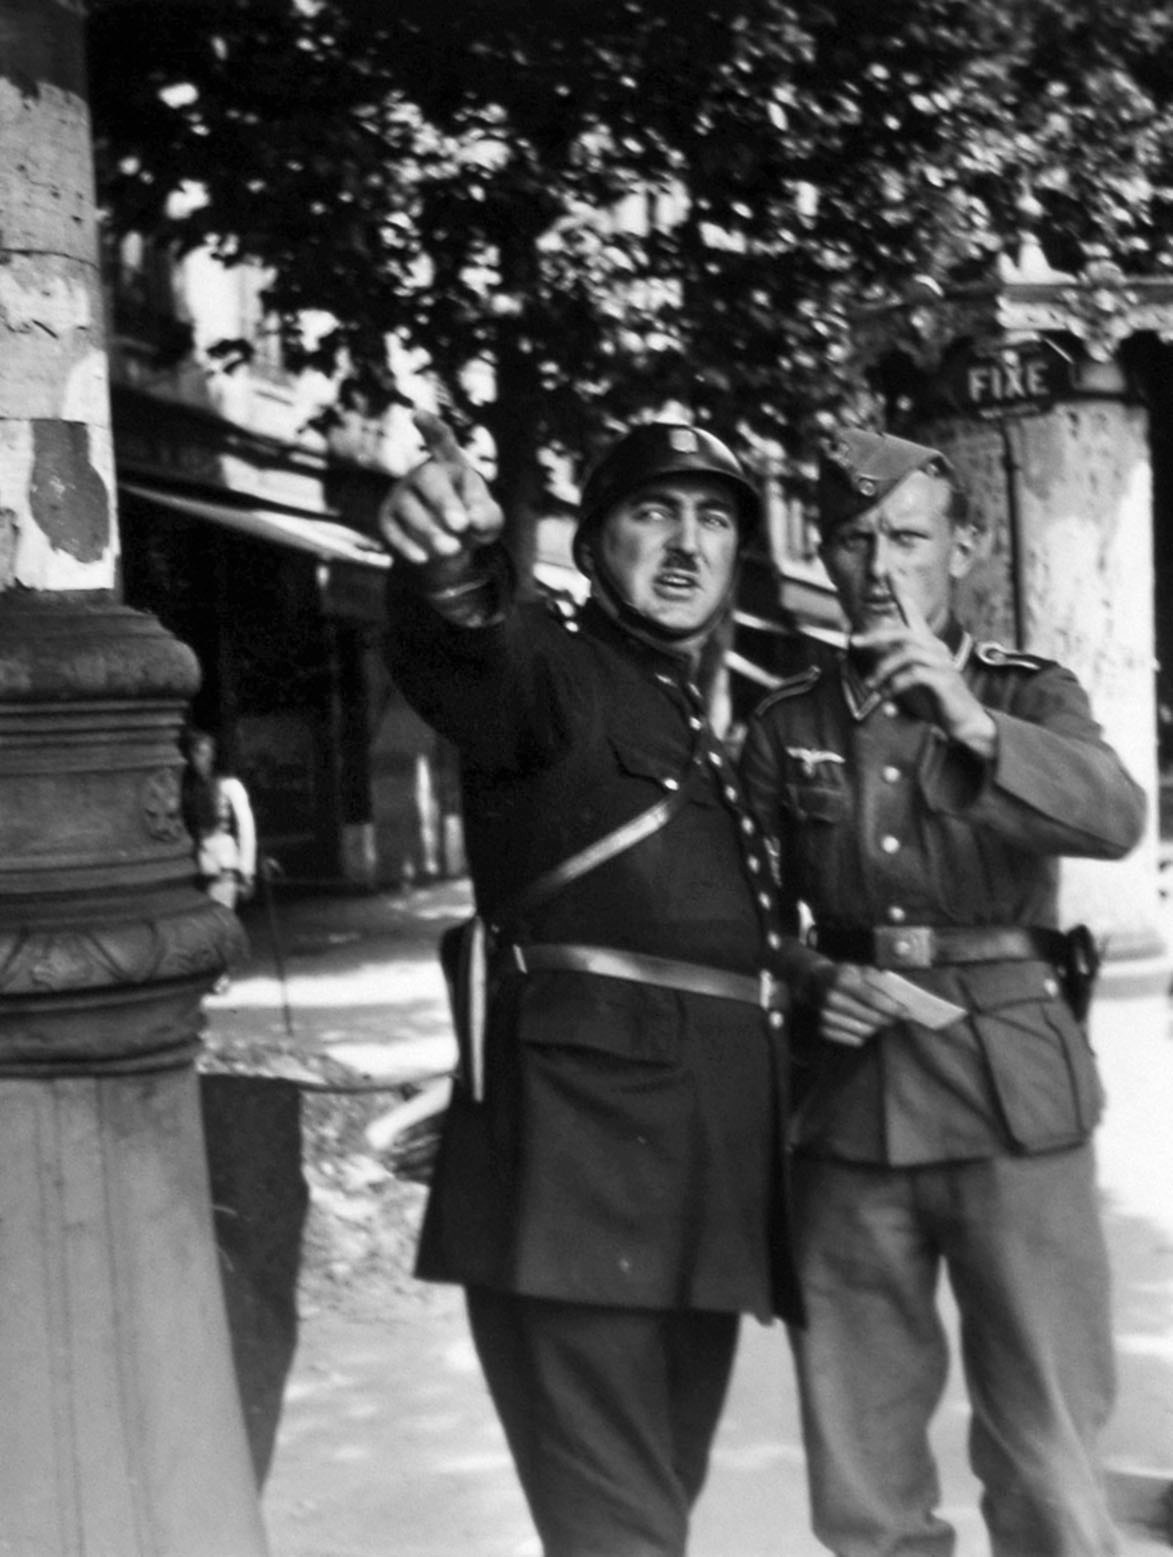 A German NCO in Paris gets directions from a gendarme. German soldiers were ordered to be on their best behavior in Paris, the comfortable posting most sought after, especially after the war on the Eastern Front began. Many Germans had visited France prior to the Nazi era as welcomed tourists. As occupiers, they found the French, in great part, accommodating. 